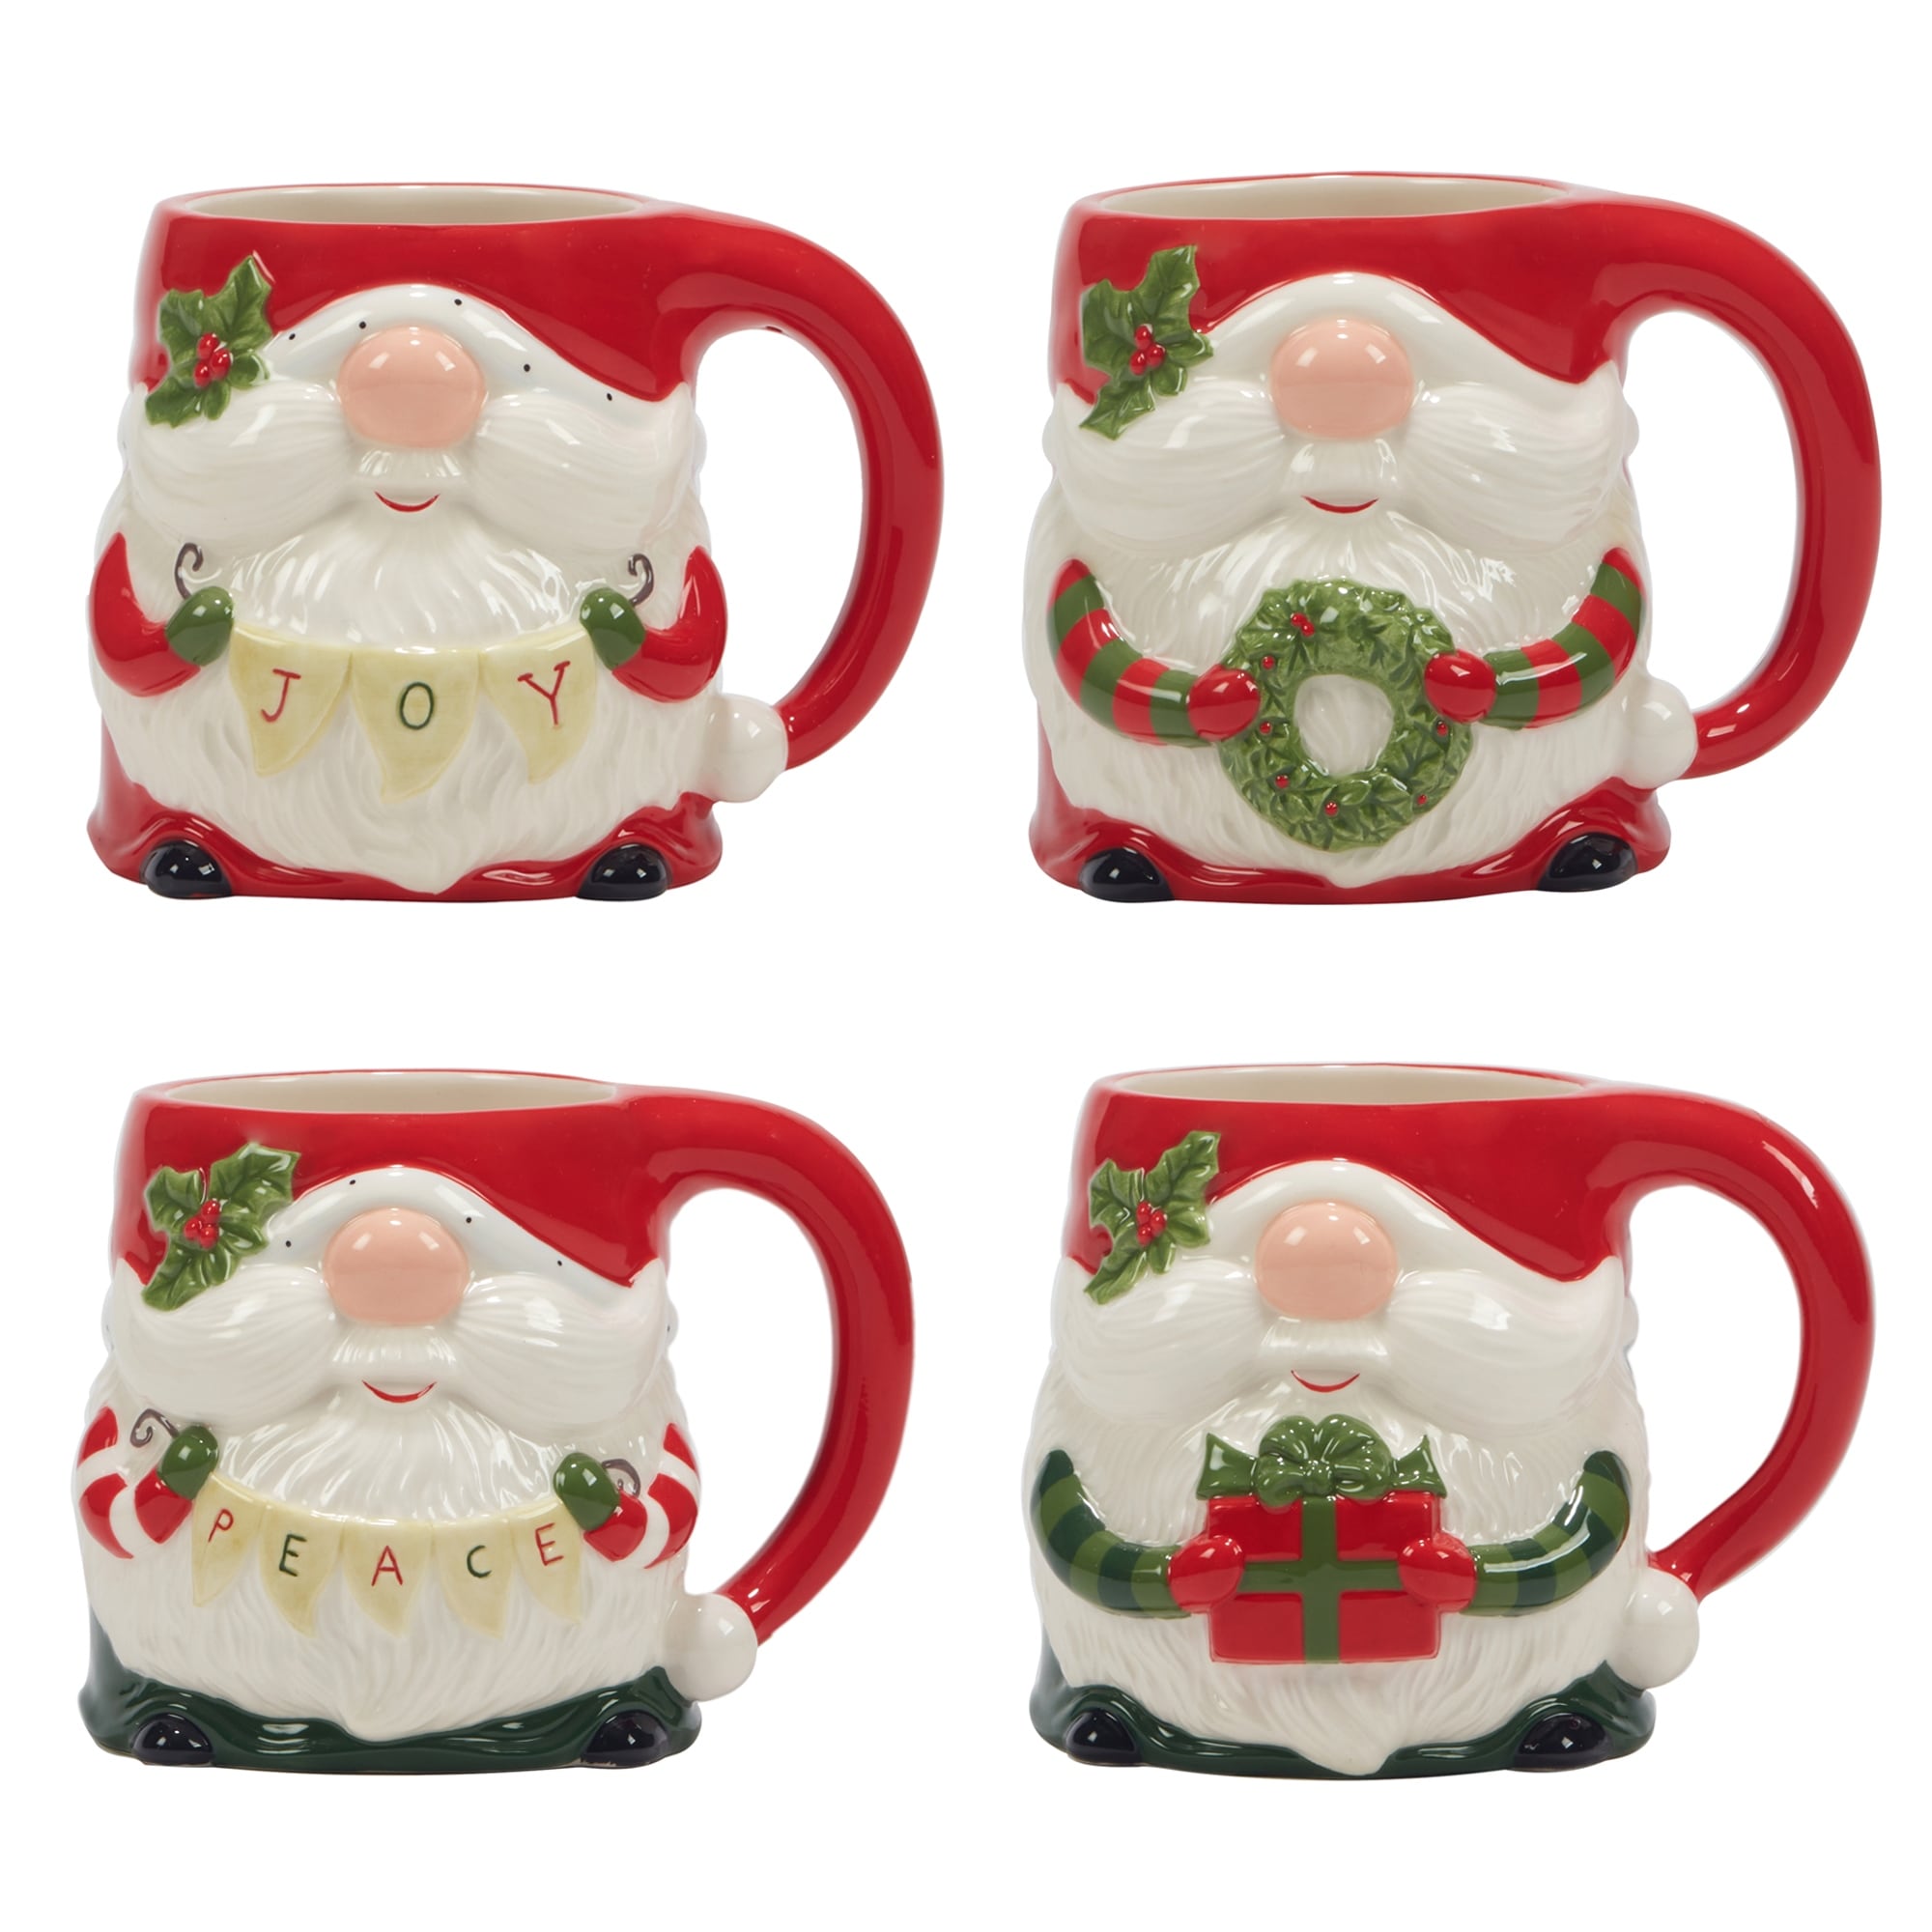 https://ak1.ostkcdn.com/images/products/is/images/direct/a7b951f54fcf8e5c9f6b0e34d452a484216948c0/Certified-International-Christmas-Gnomes-16-oz.3-D-Mugs%2C-Set-of-4-Assorted-Designs.jpg